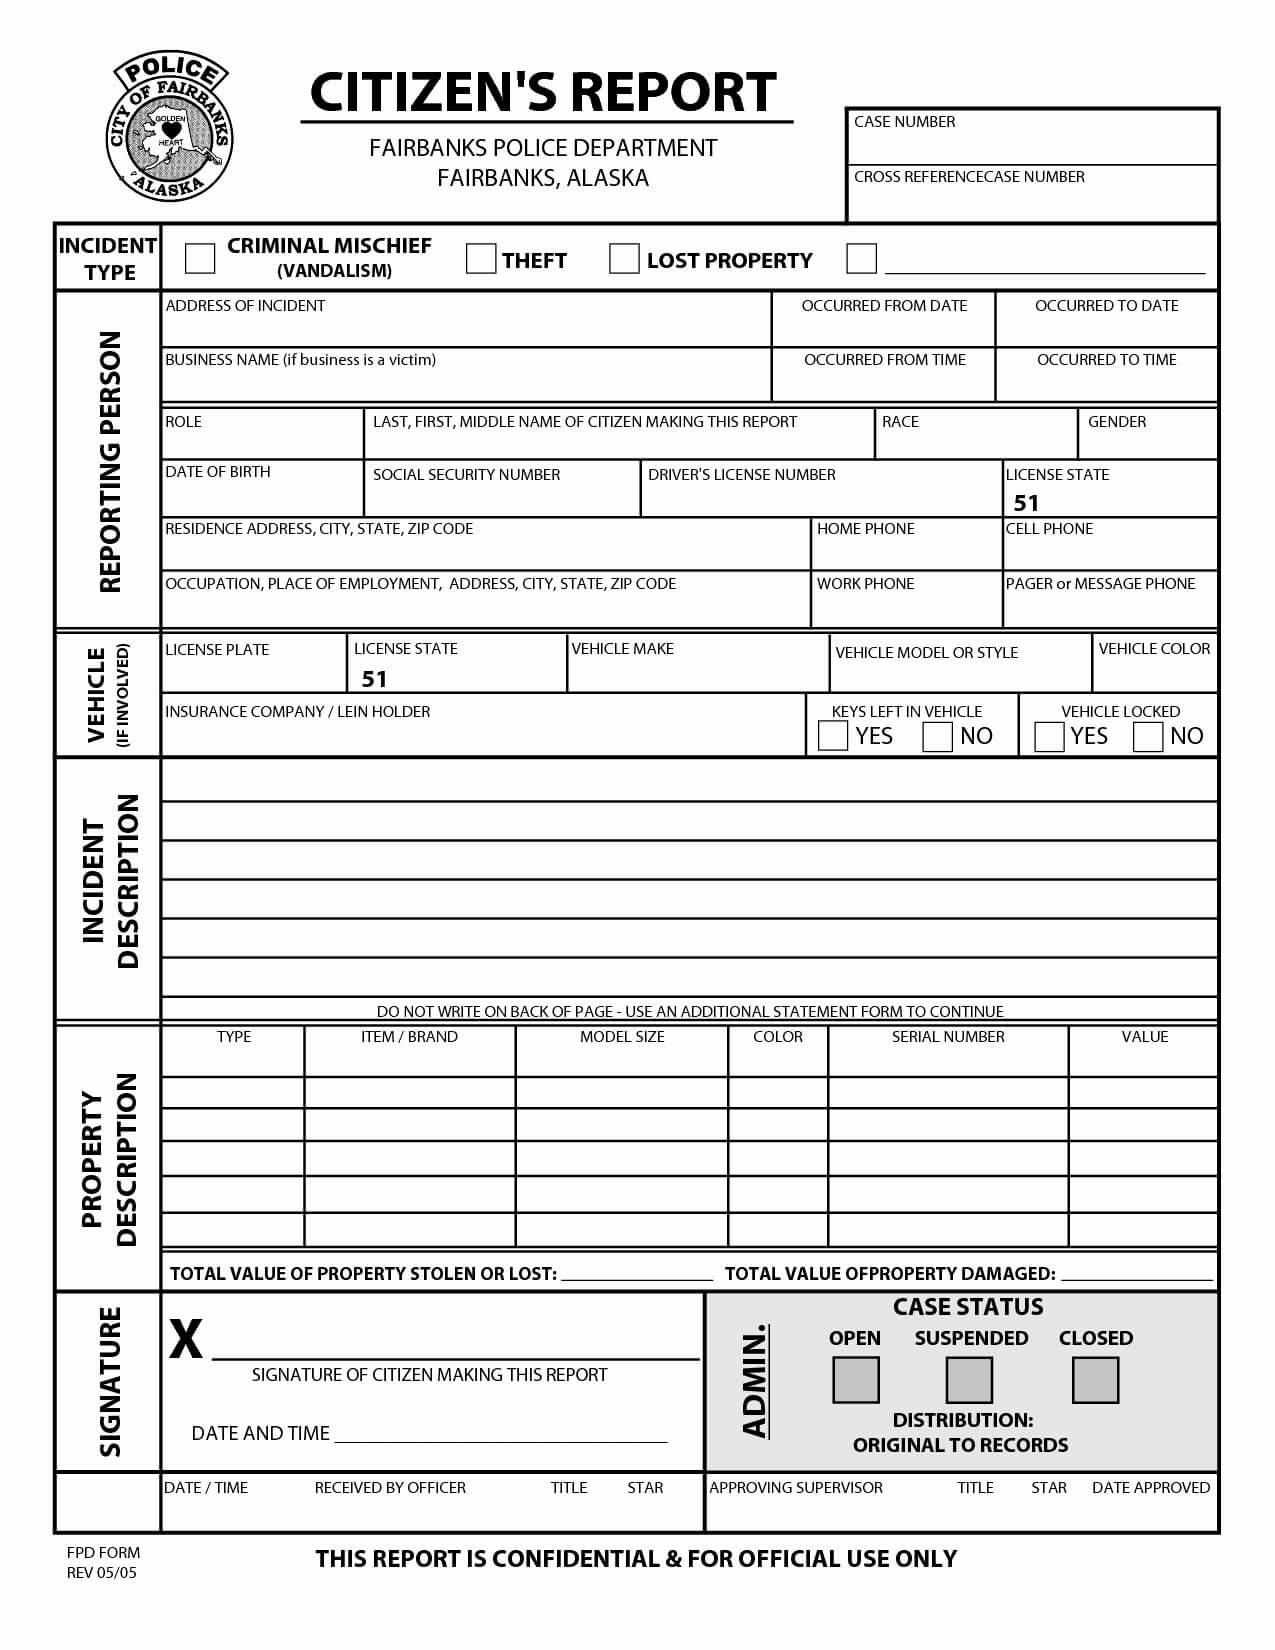 Blank Police Report Template | Wesleykimlerstudio Within Police Report Template Pdf